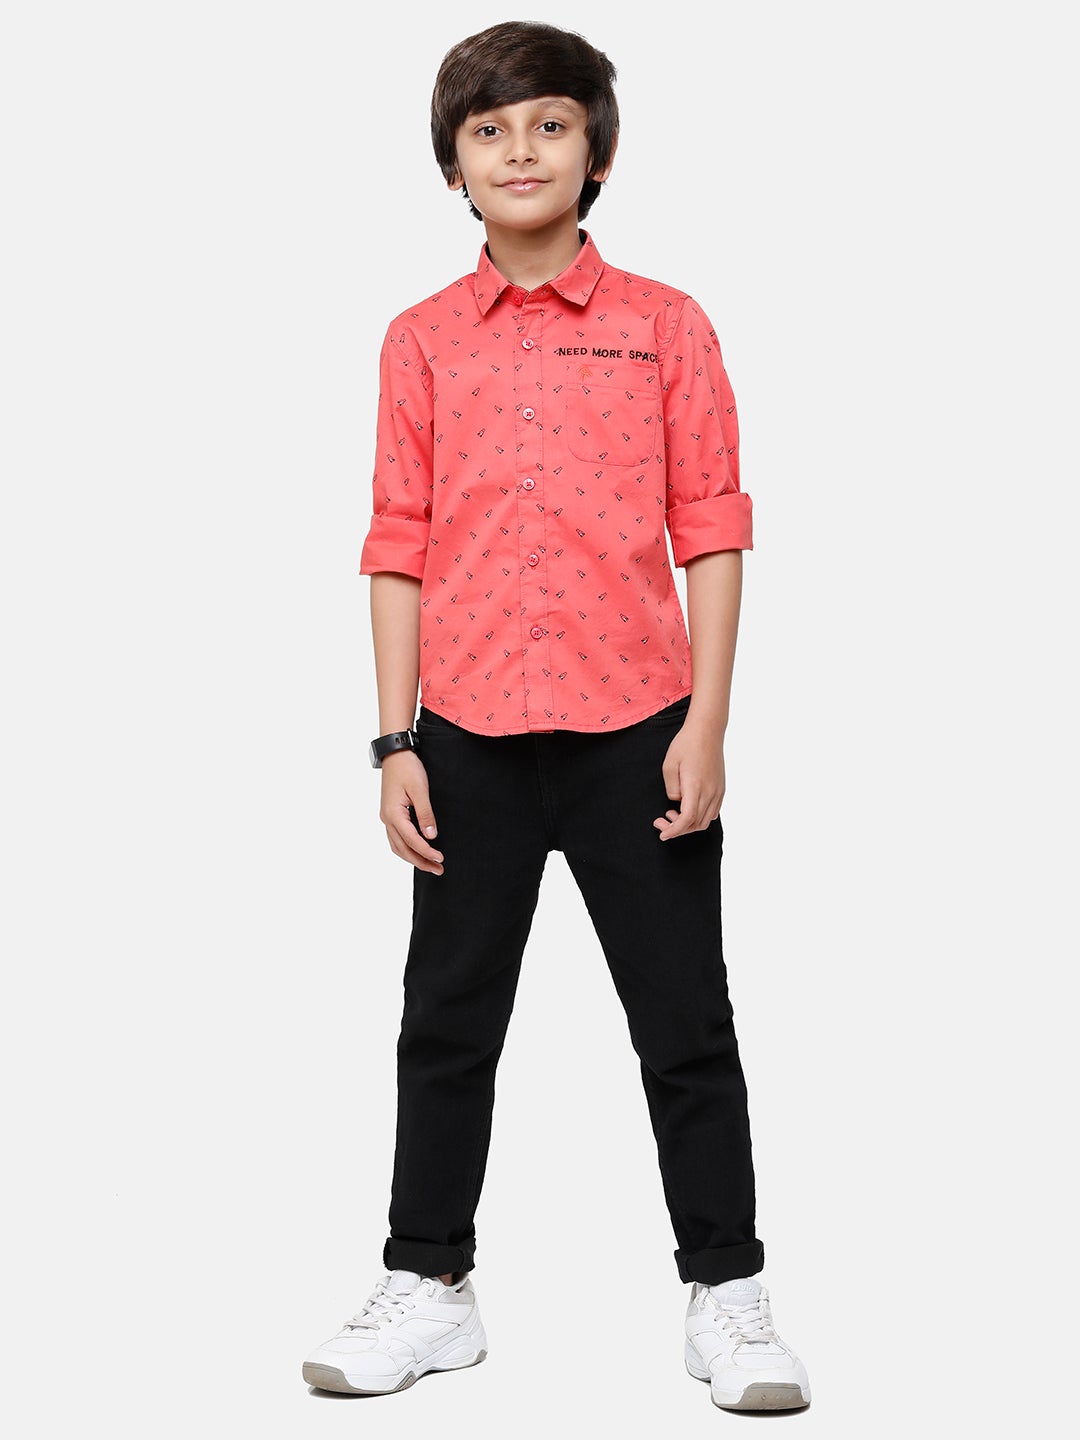 CP Boys Red Printed Full Sleeve Slim Fit Shirt Shirts Classic Polo 